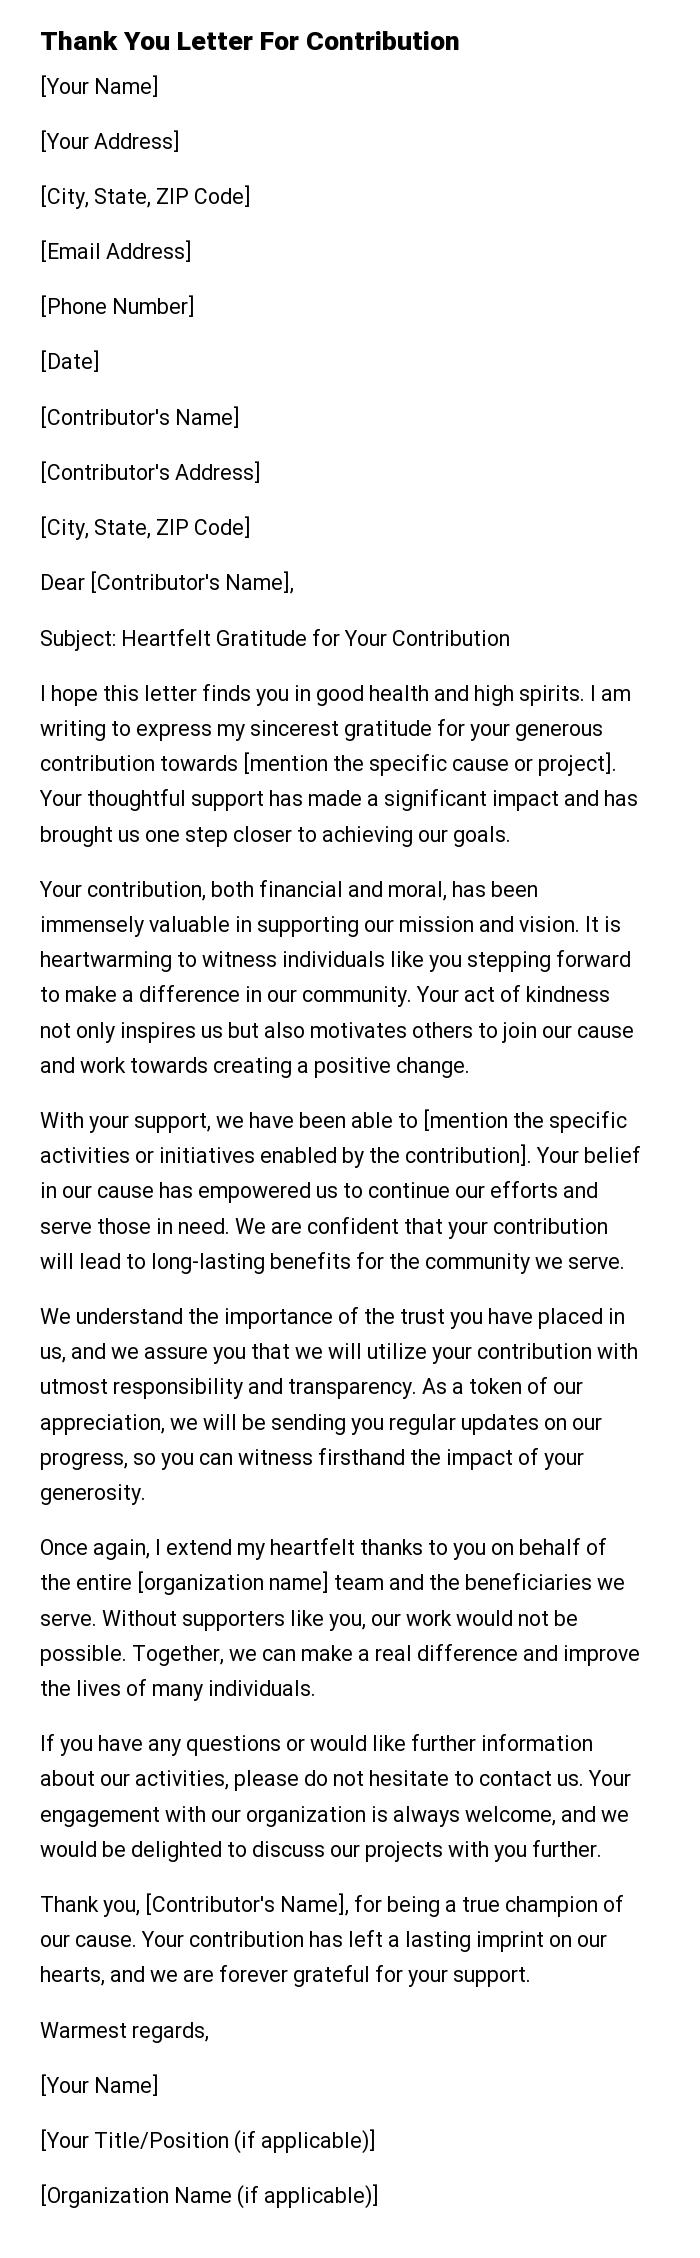 Thank You Letter For Contribution